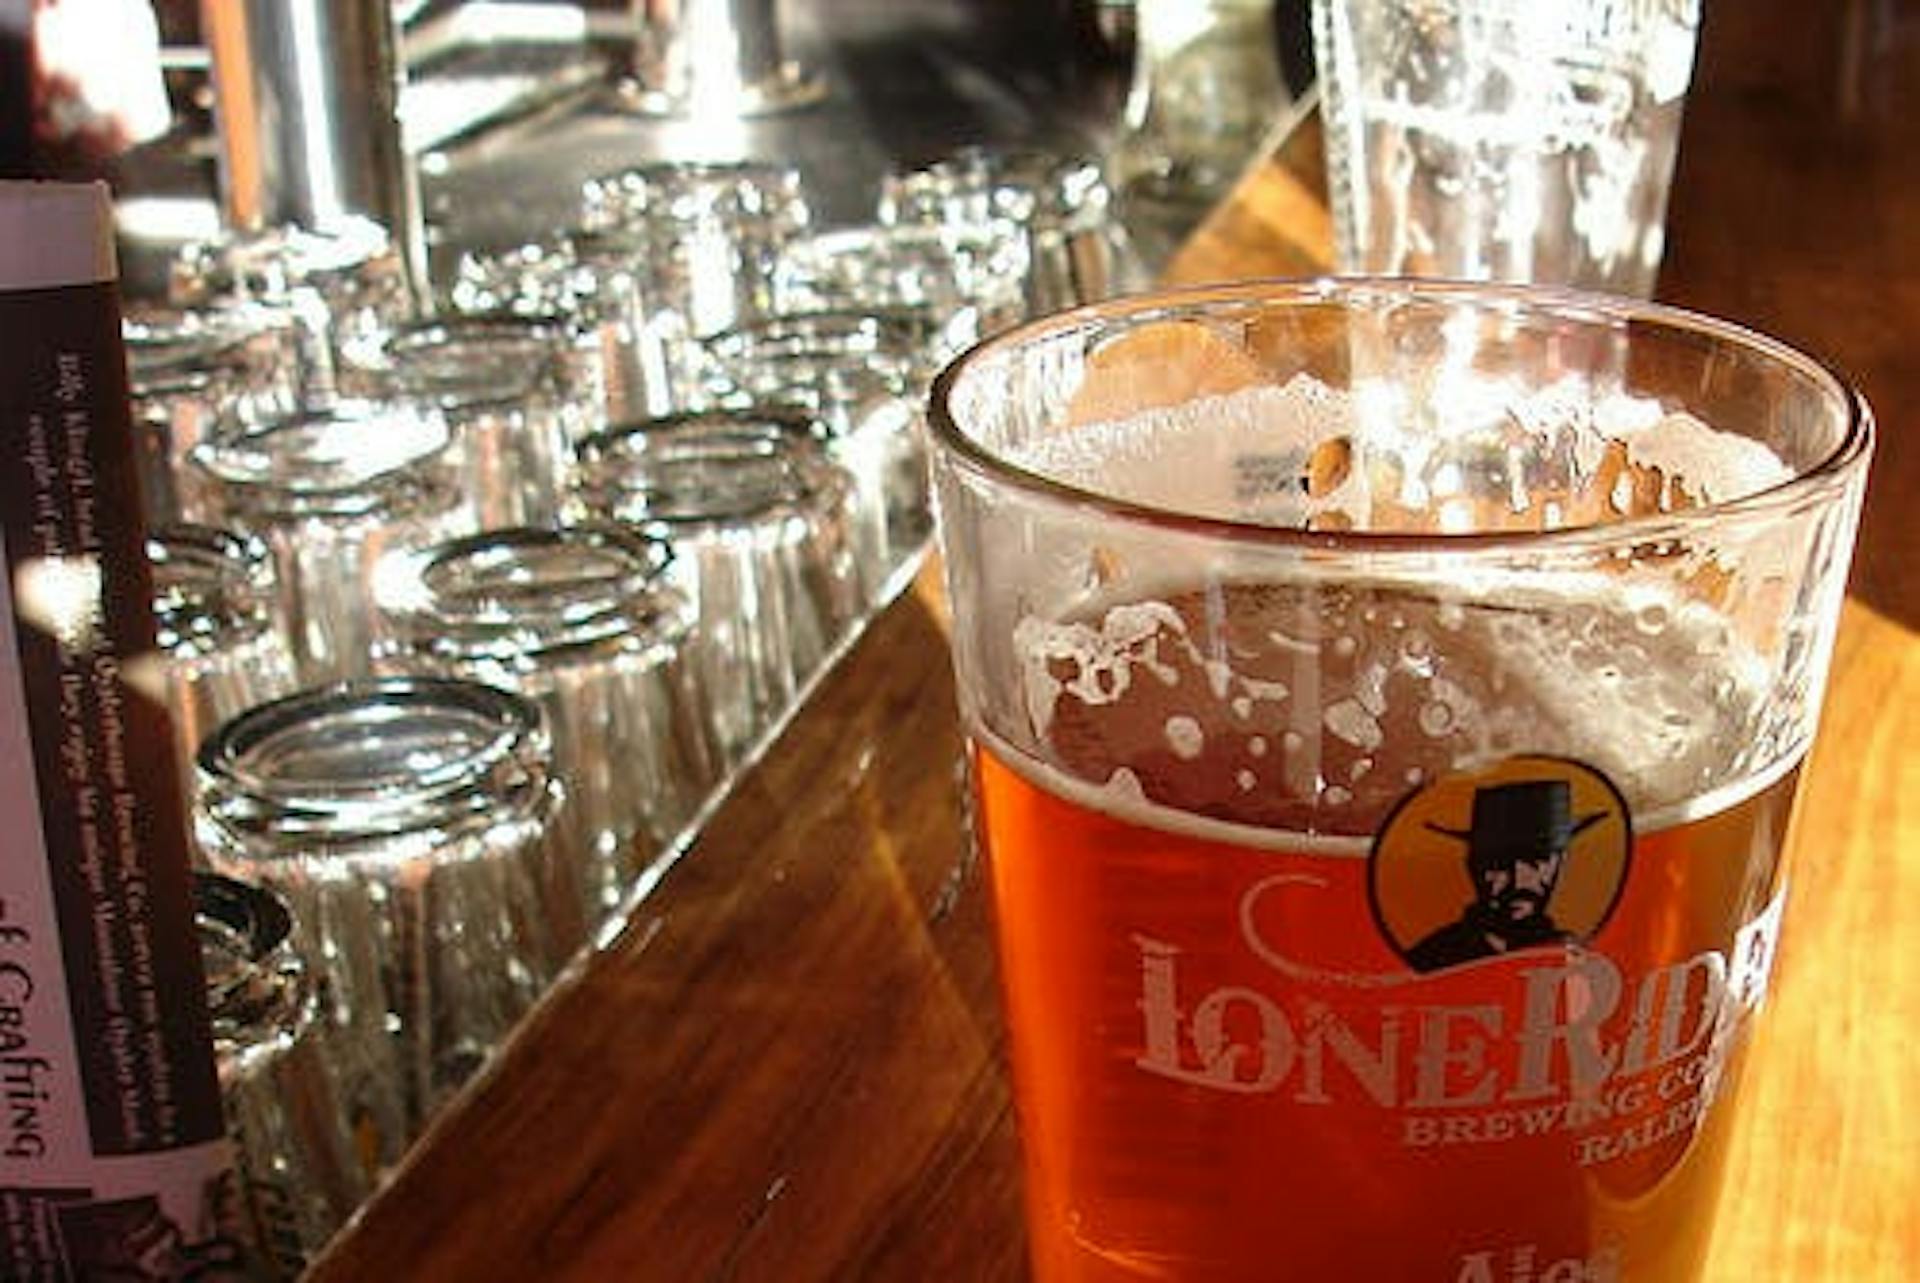 What's on Tap at Lonerider